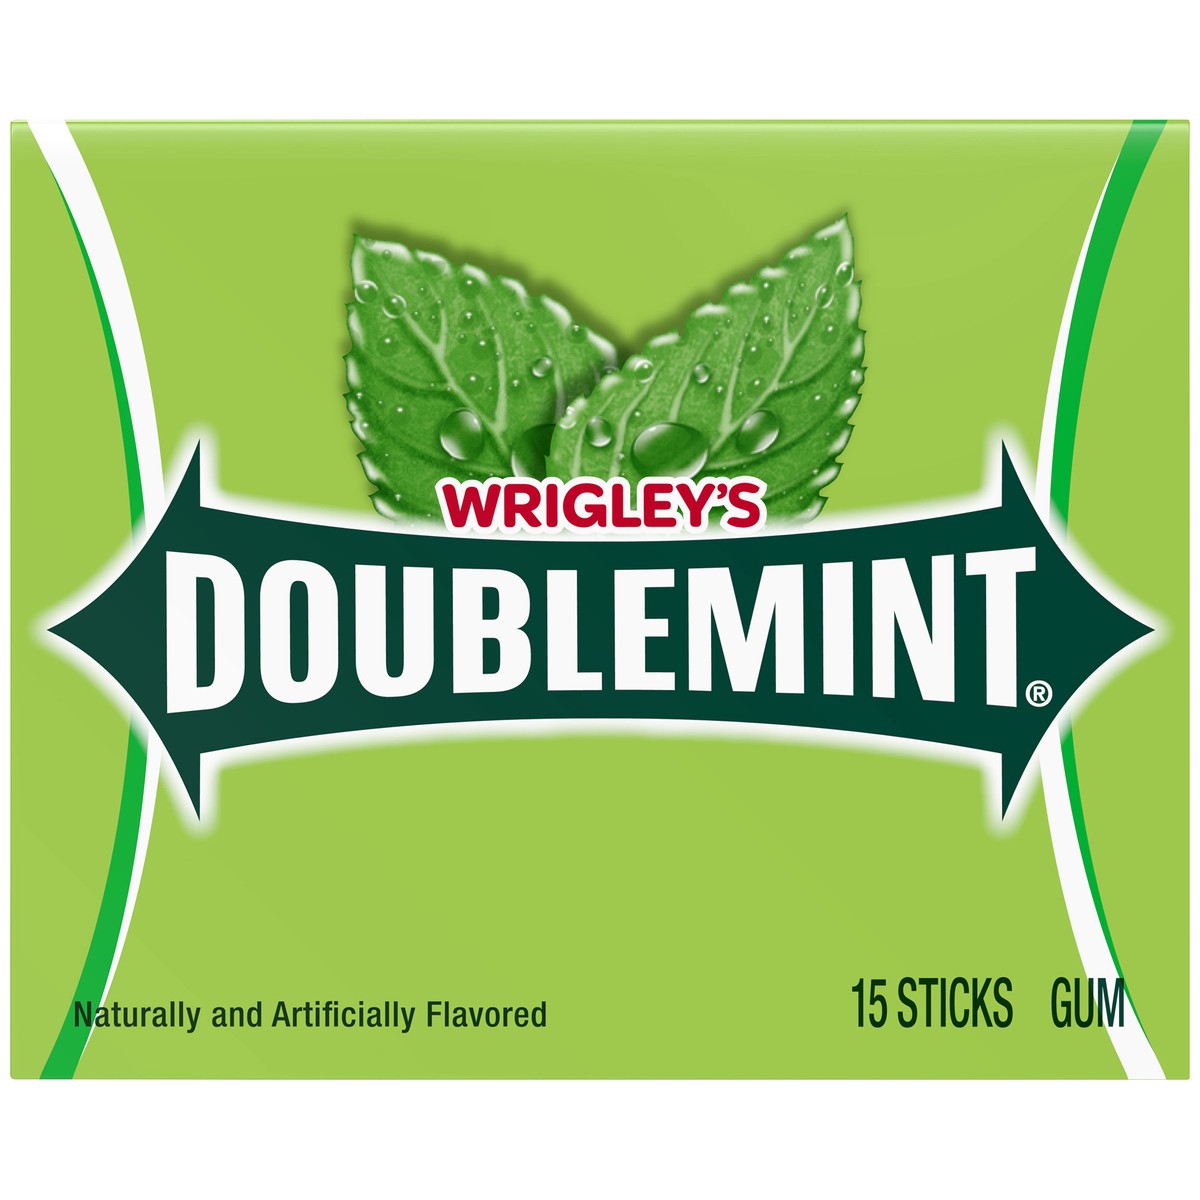 slide 1 of 11, Doublemint Wrigley's Doublemint Chewing GumSingle Pack, 